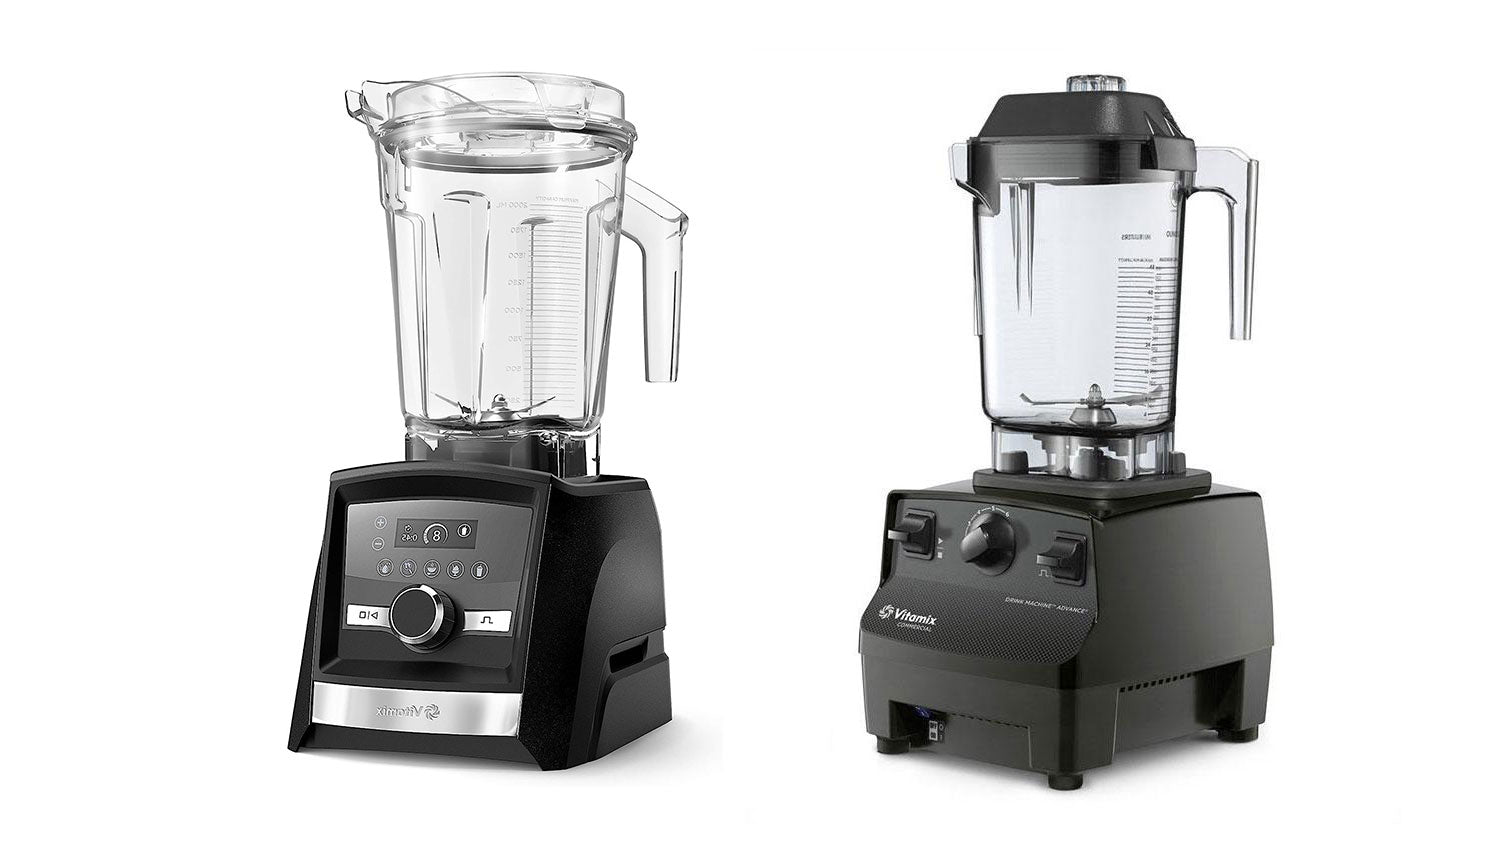 Vitamix A3500 vs. Drink Machine Advance: A Comprehensive Comparison for Home and Commercial Blending Needs